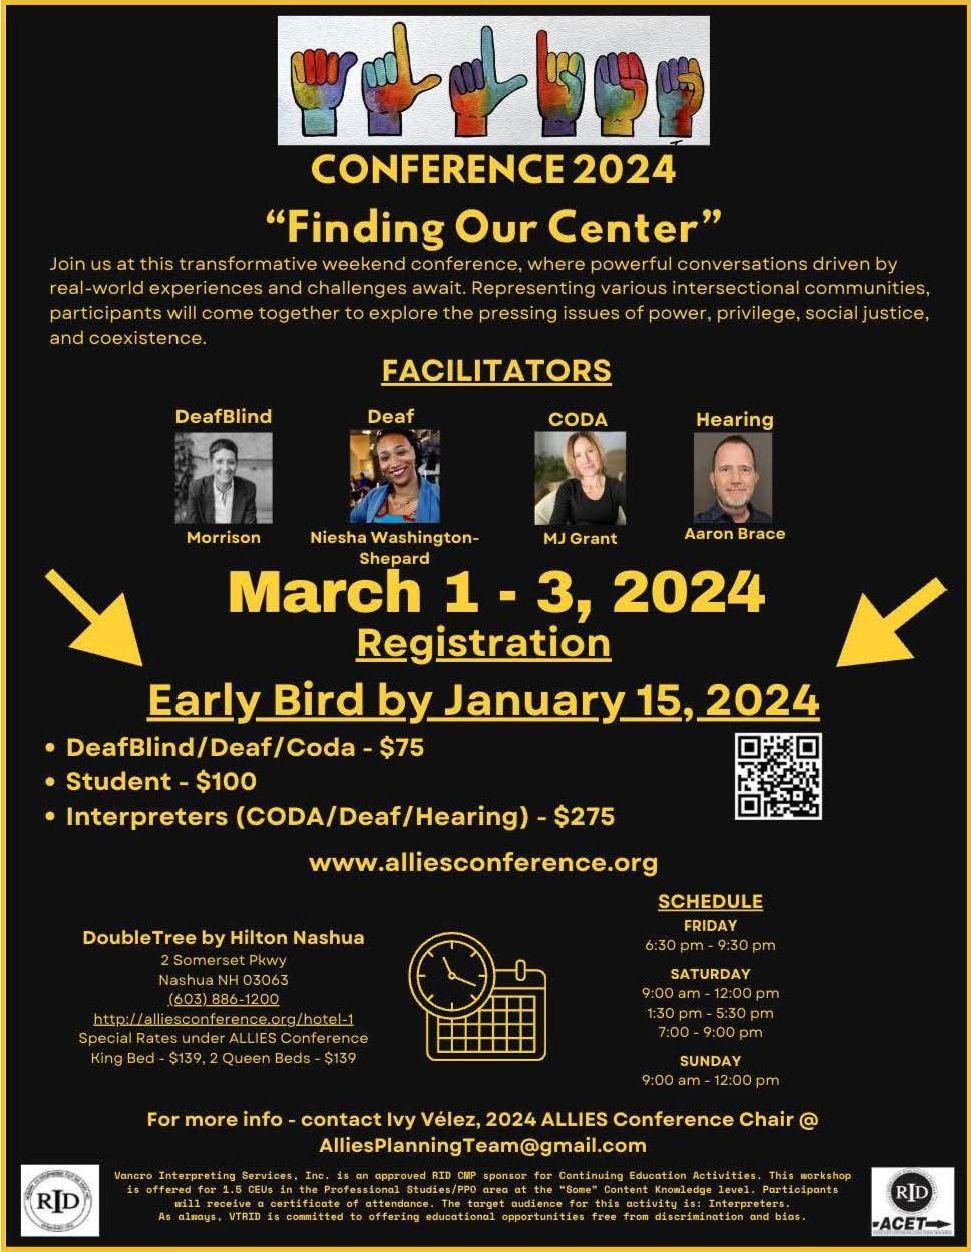 The image is a poster for the "CONFERENCE 2024" titled "Finding Our Center," which is described as a transformative weekend conference for powerful conversations about real-world experiences and challenges, especially regarding intersectional communities and issues of power, privilege, social justice, and coexistence.  The conference is scheduled for March 1-3, 2024, and offers early bird registration by January 15, 2024, with different pricing tiers: DeafBlind/Deaf/Coda registration at $75, Student registration at $100, and Interpreters (CODA/Deaf/Hearing) at $275. The website for registration and further information is www.alliesconference.org.  Facilitators listed are from diverse backgrounds including DeafBlind (Morrison), Deaf (Niesha Washington-Shepard), CODA (MJ Grant), and Hearing (Aaron Brace), each accompanied by a headshot.  The venue for the conference is DoubleTree by Hilton Nashua in Nashua, NH, with the address and telephone number provided, as well as special hotel rates for attendees. A QR code for presumably quick access to more information or registration is also present.  For more information, contact Ivy Vélez, 2024 ALLIES Conference Chair, at the email AlliesPlanningTeam@gmail.com.  The poster also contains logos for interpreting services, a commitment to continued education, and an approval statement for CEUs. The schedule for the conference is listed as Friday 6:30 pm - 9:30 pm, Saturday 9:00 am - 12:00 pm and 1:30 pm - 5:30 pm, and Sunday 9:00 am - 12:00 pm.